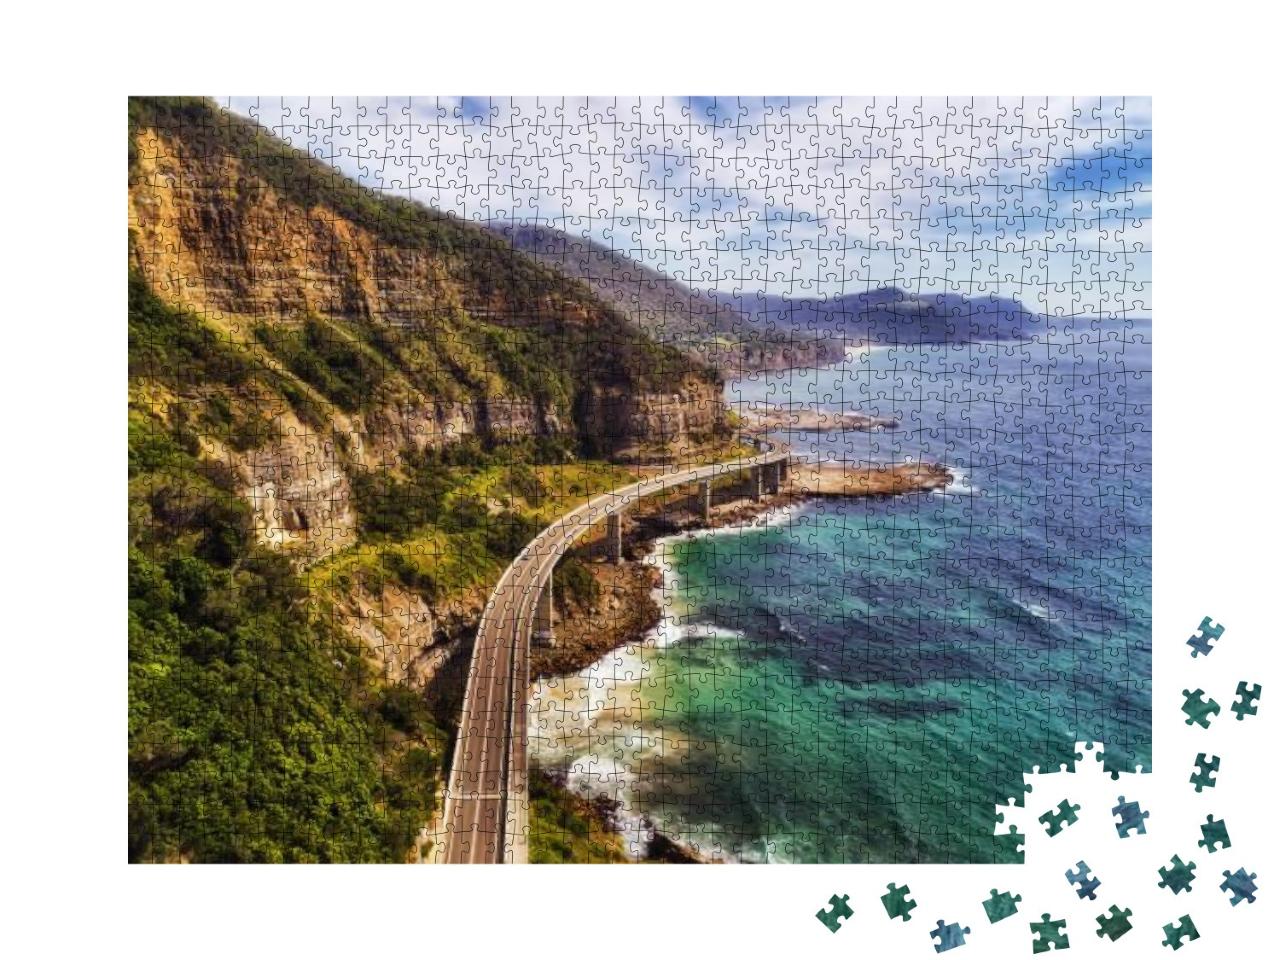 Sea Cliff Bridge At the Edge of Steep Sandstone Cliff on... Jigsaw Puzzle with 1000 pieces